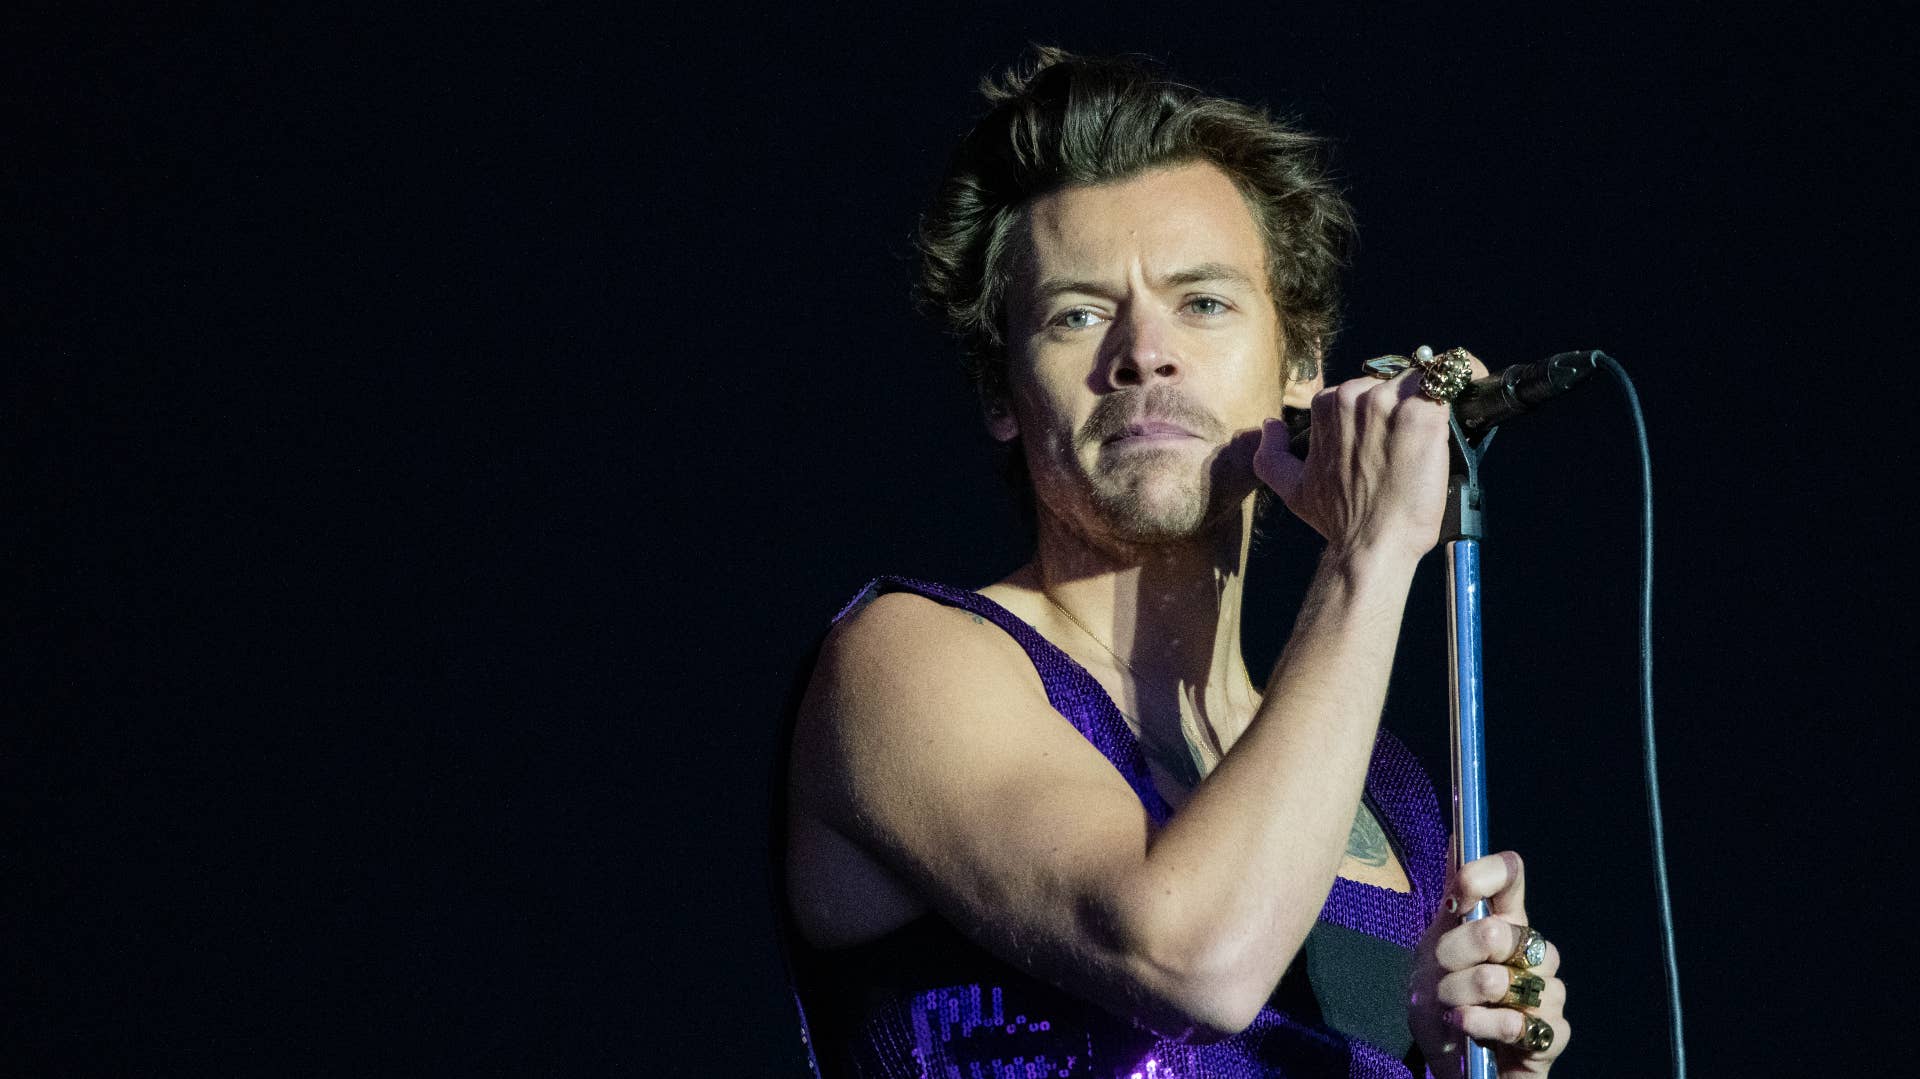 Harry Styles performs onstage during festival.